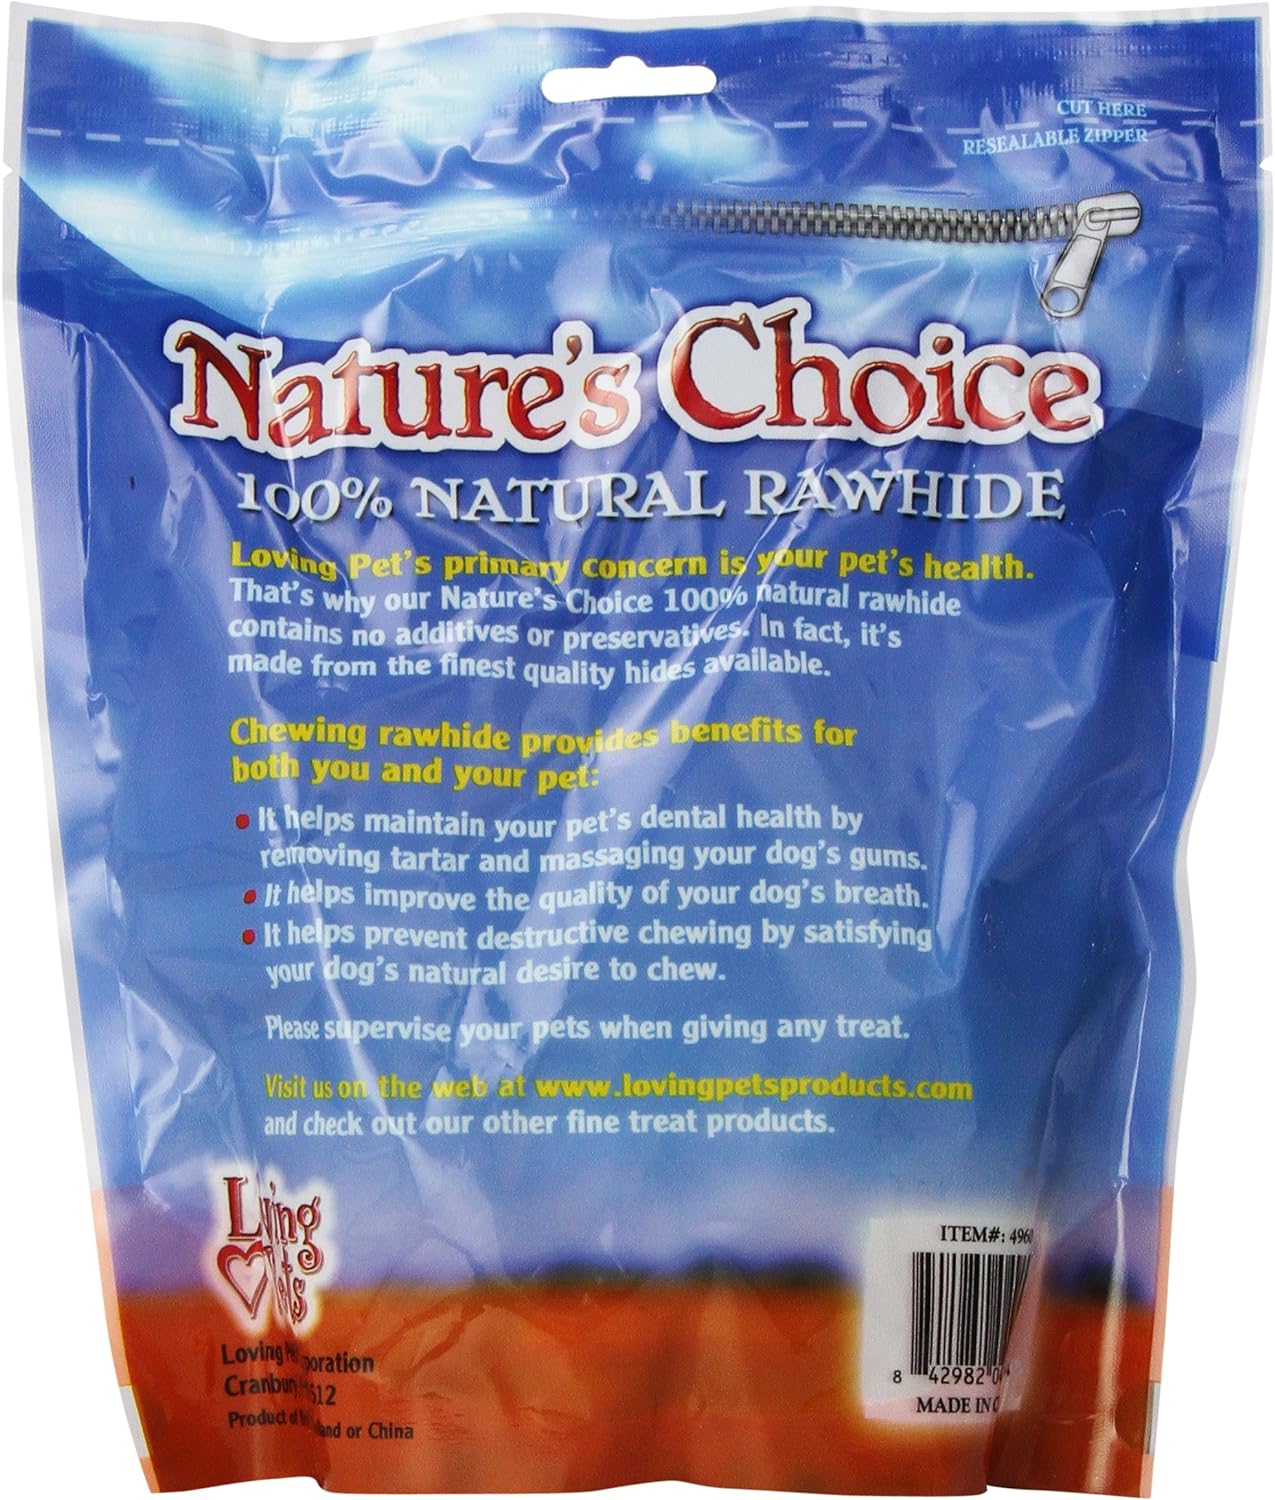 Loving Pets Nature's Choice - White Knotted Rawhide Bones for Dogs, 12 Pack of 3-4" Bones (for dogs less than 10 lbs) : Pet Supplies